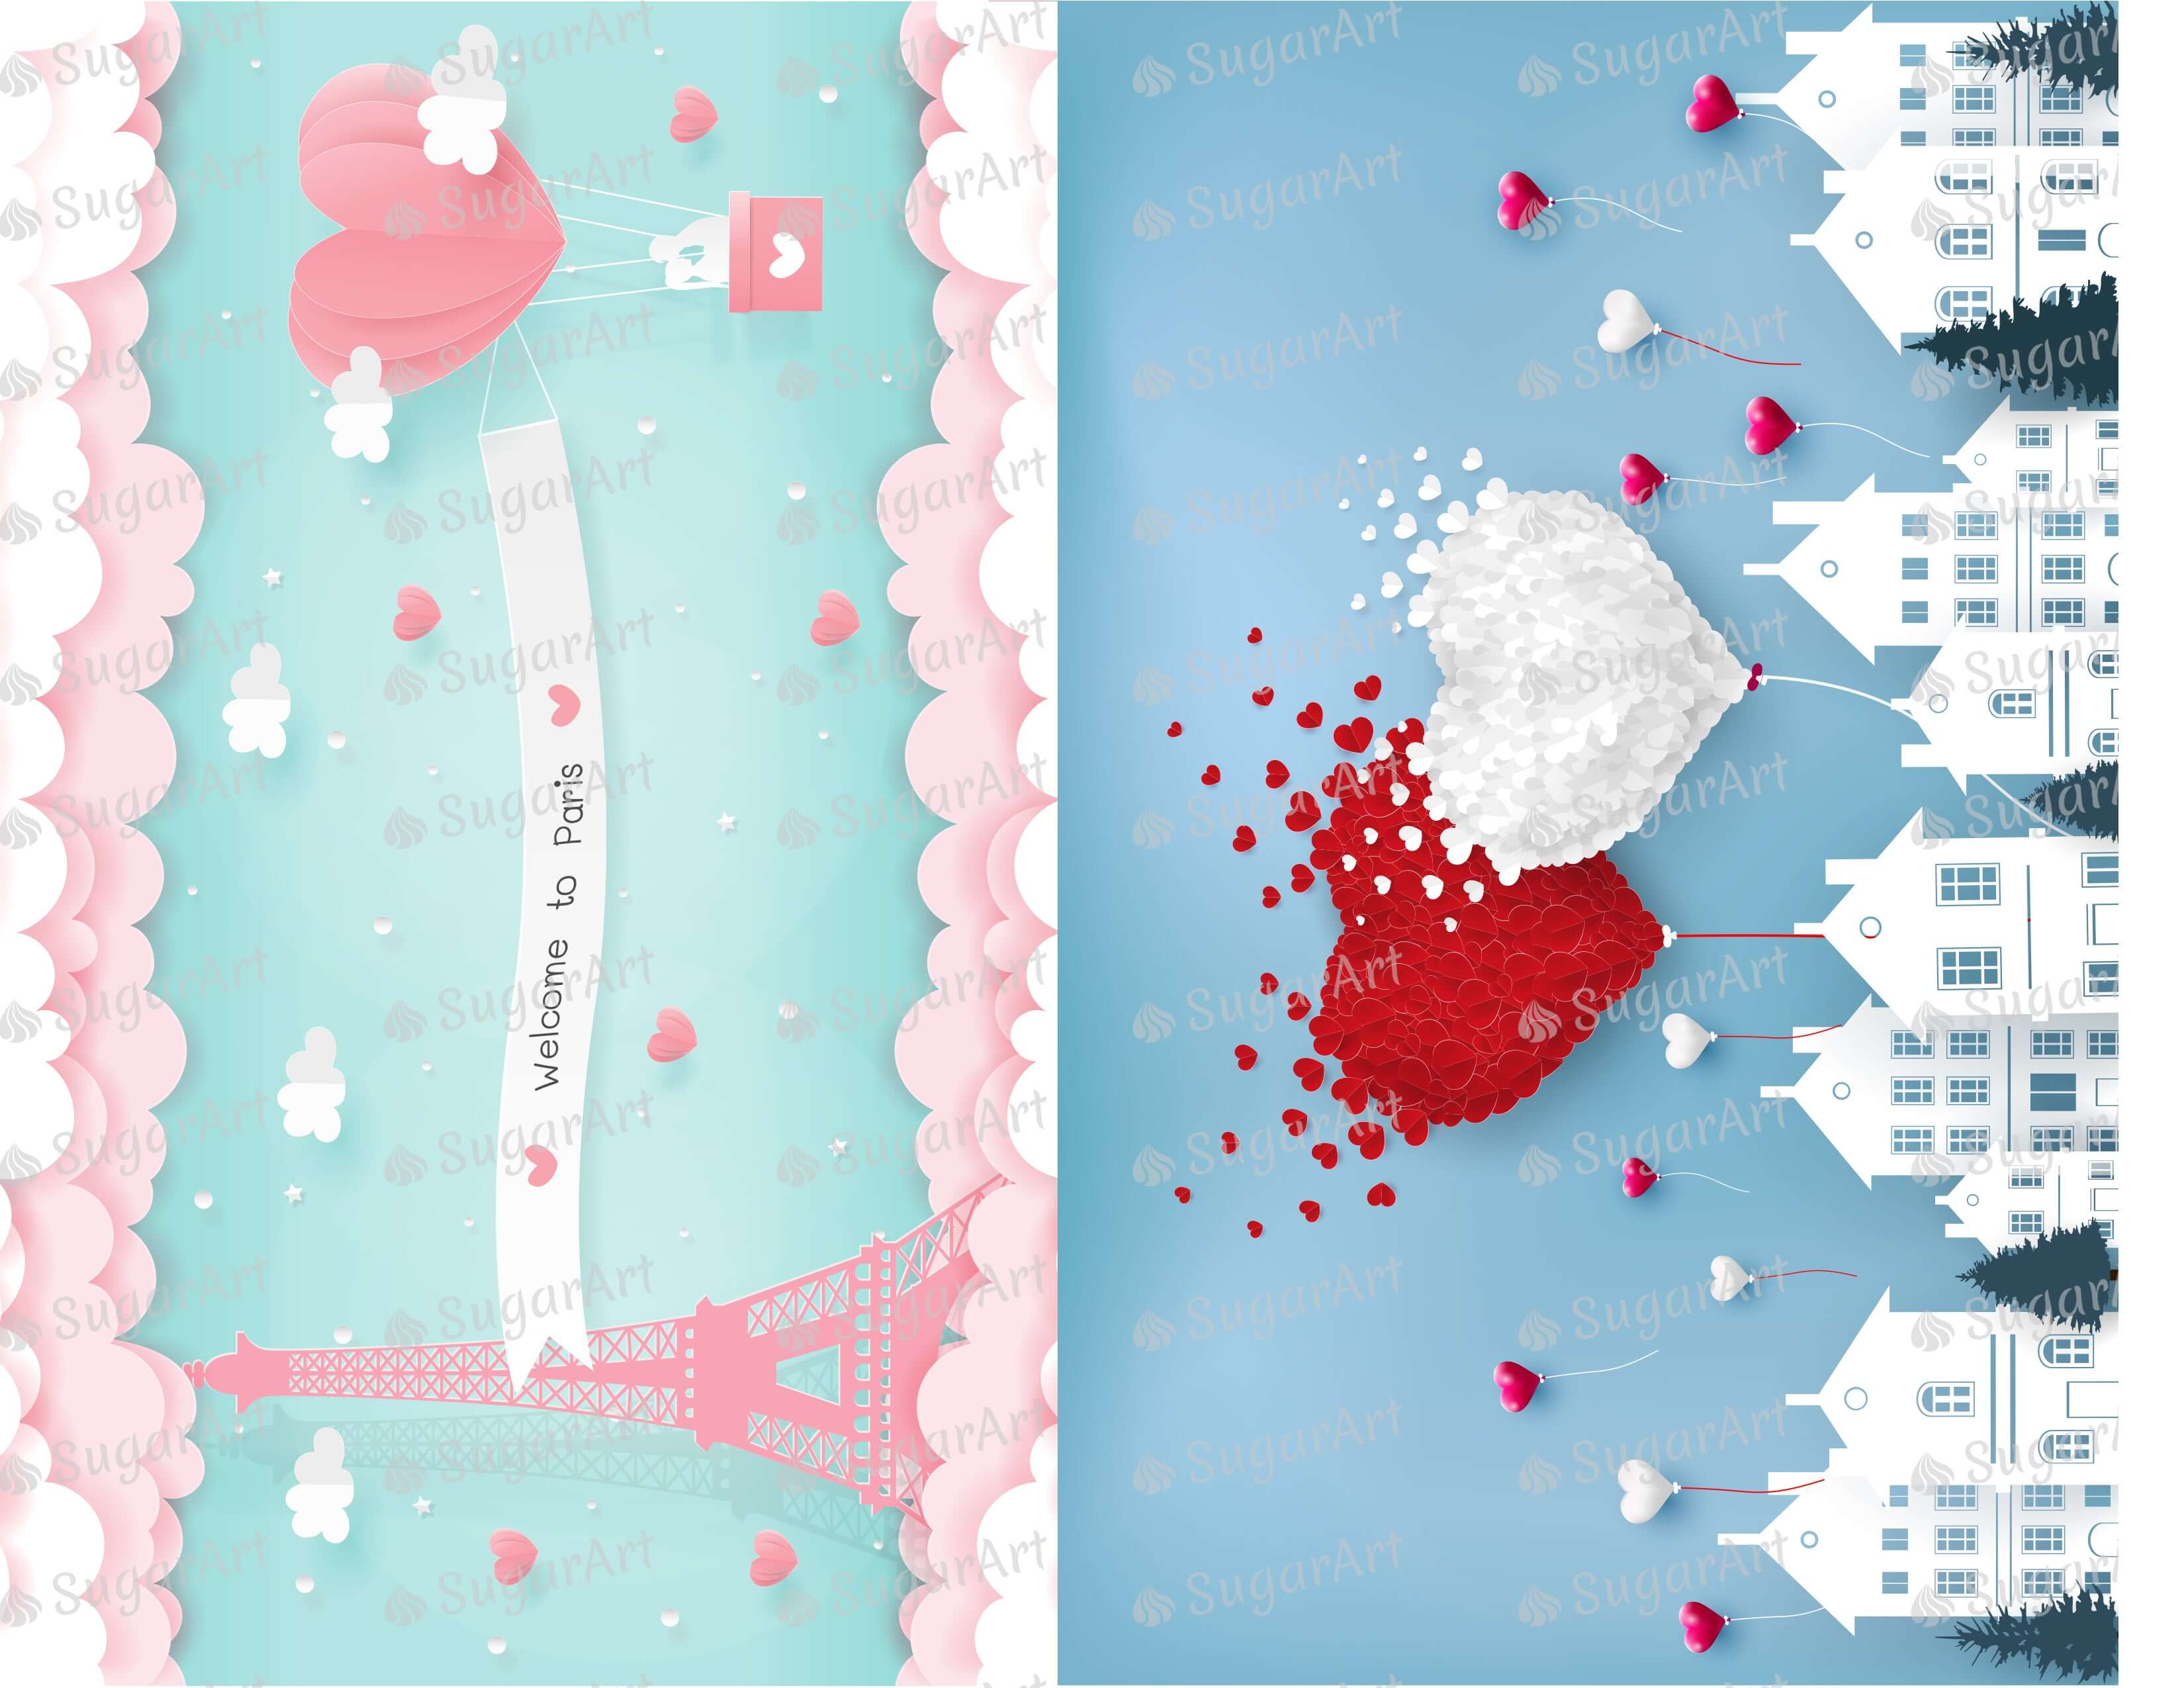 Two Romantic Illustrations - Icing - ISA219.